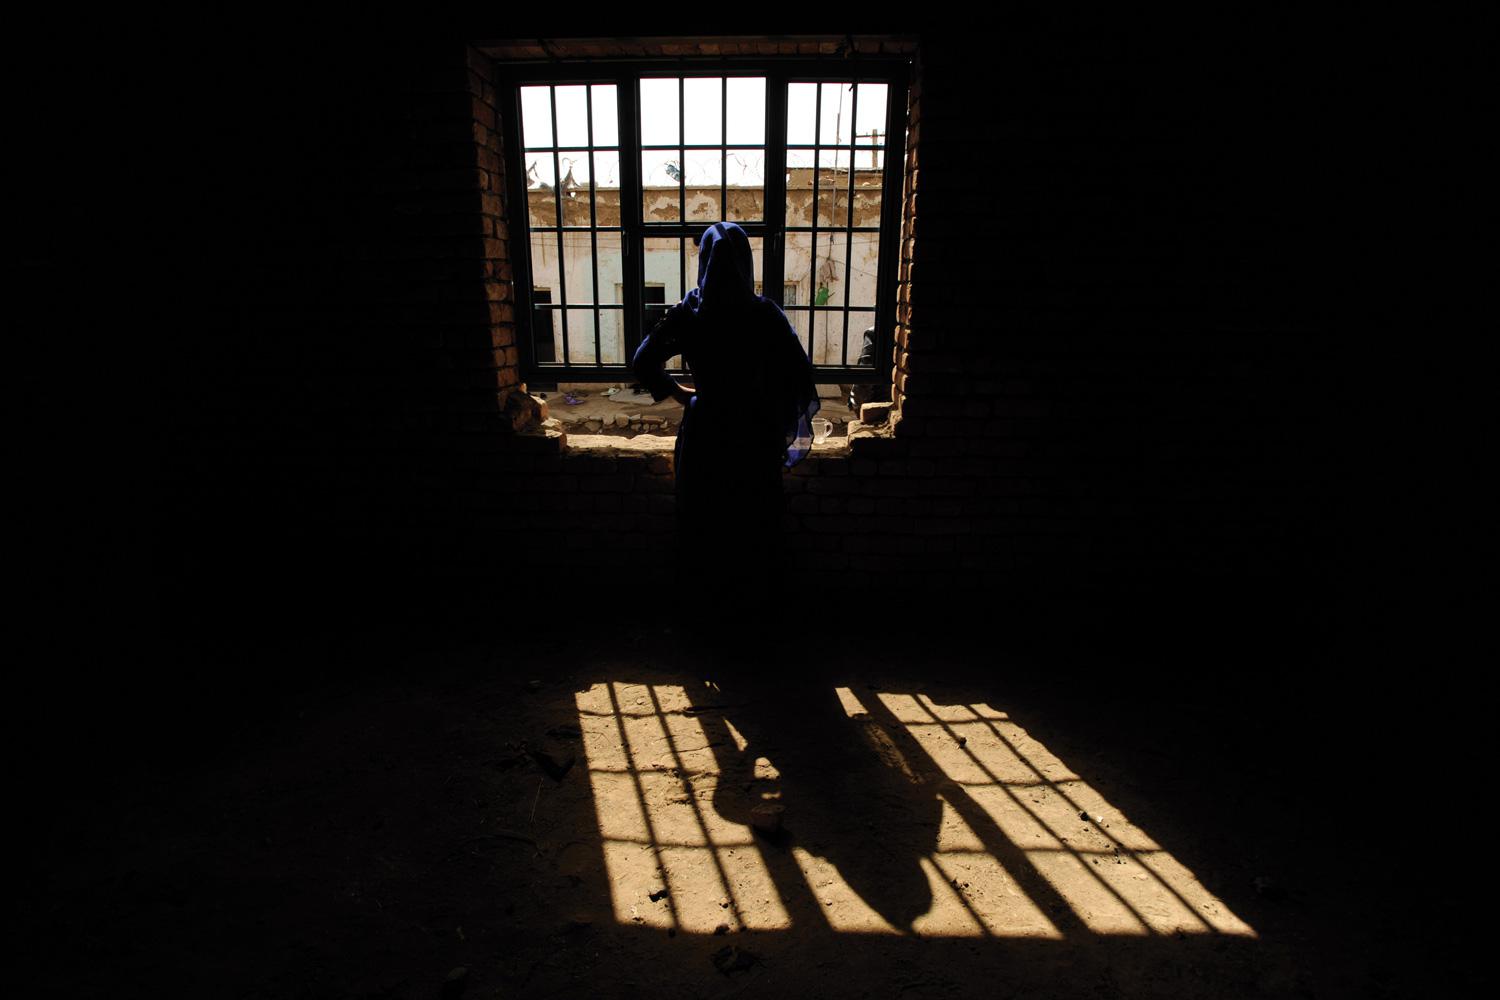 A woman prisoner looks out a window in Parwan prison north of Kabul, Afghanistan, in February 2011. The woman was convicted of moral crimes after a man from her neighborhood raped her. She later gave birth in prison.